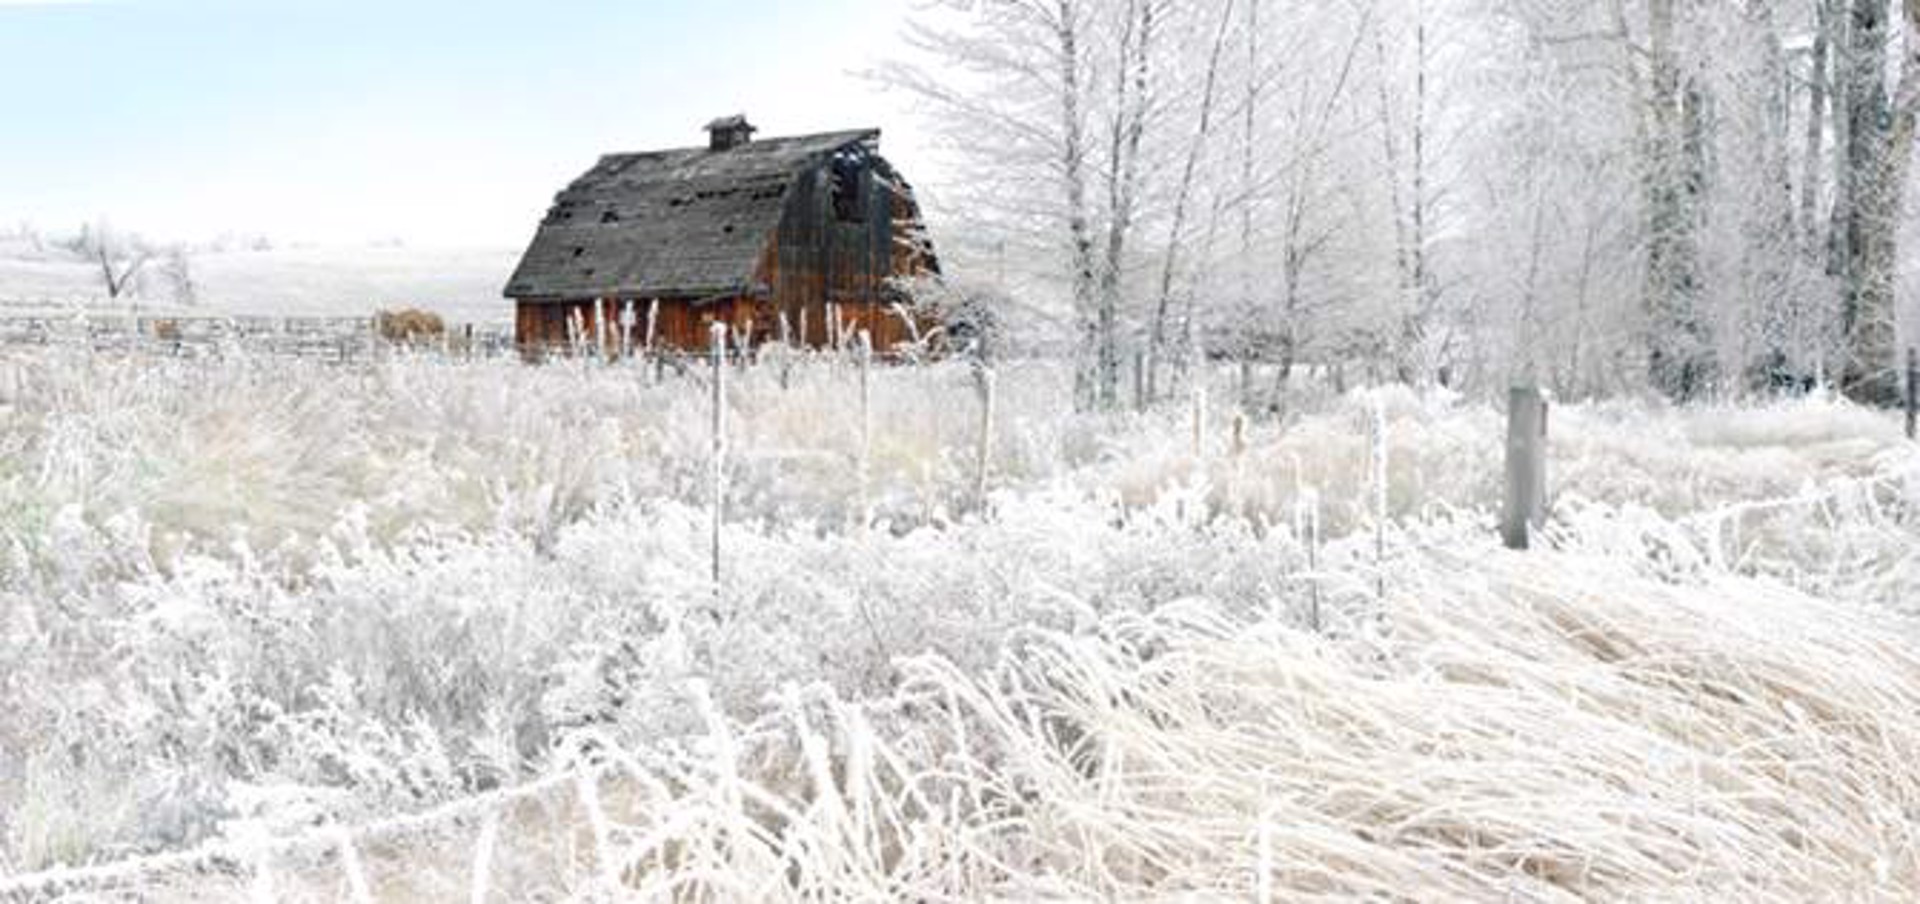 Barn and Hoar Frost (24x50 Metal) by Pete Ramberg